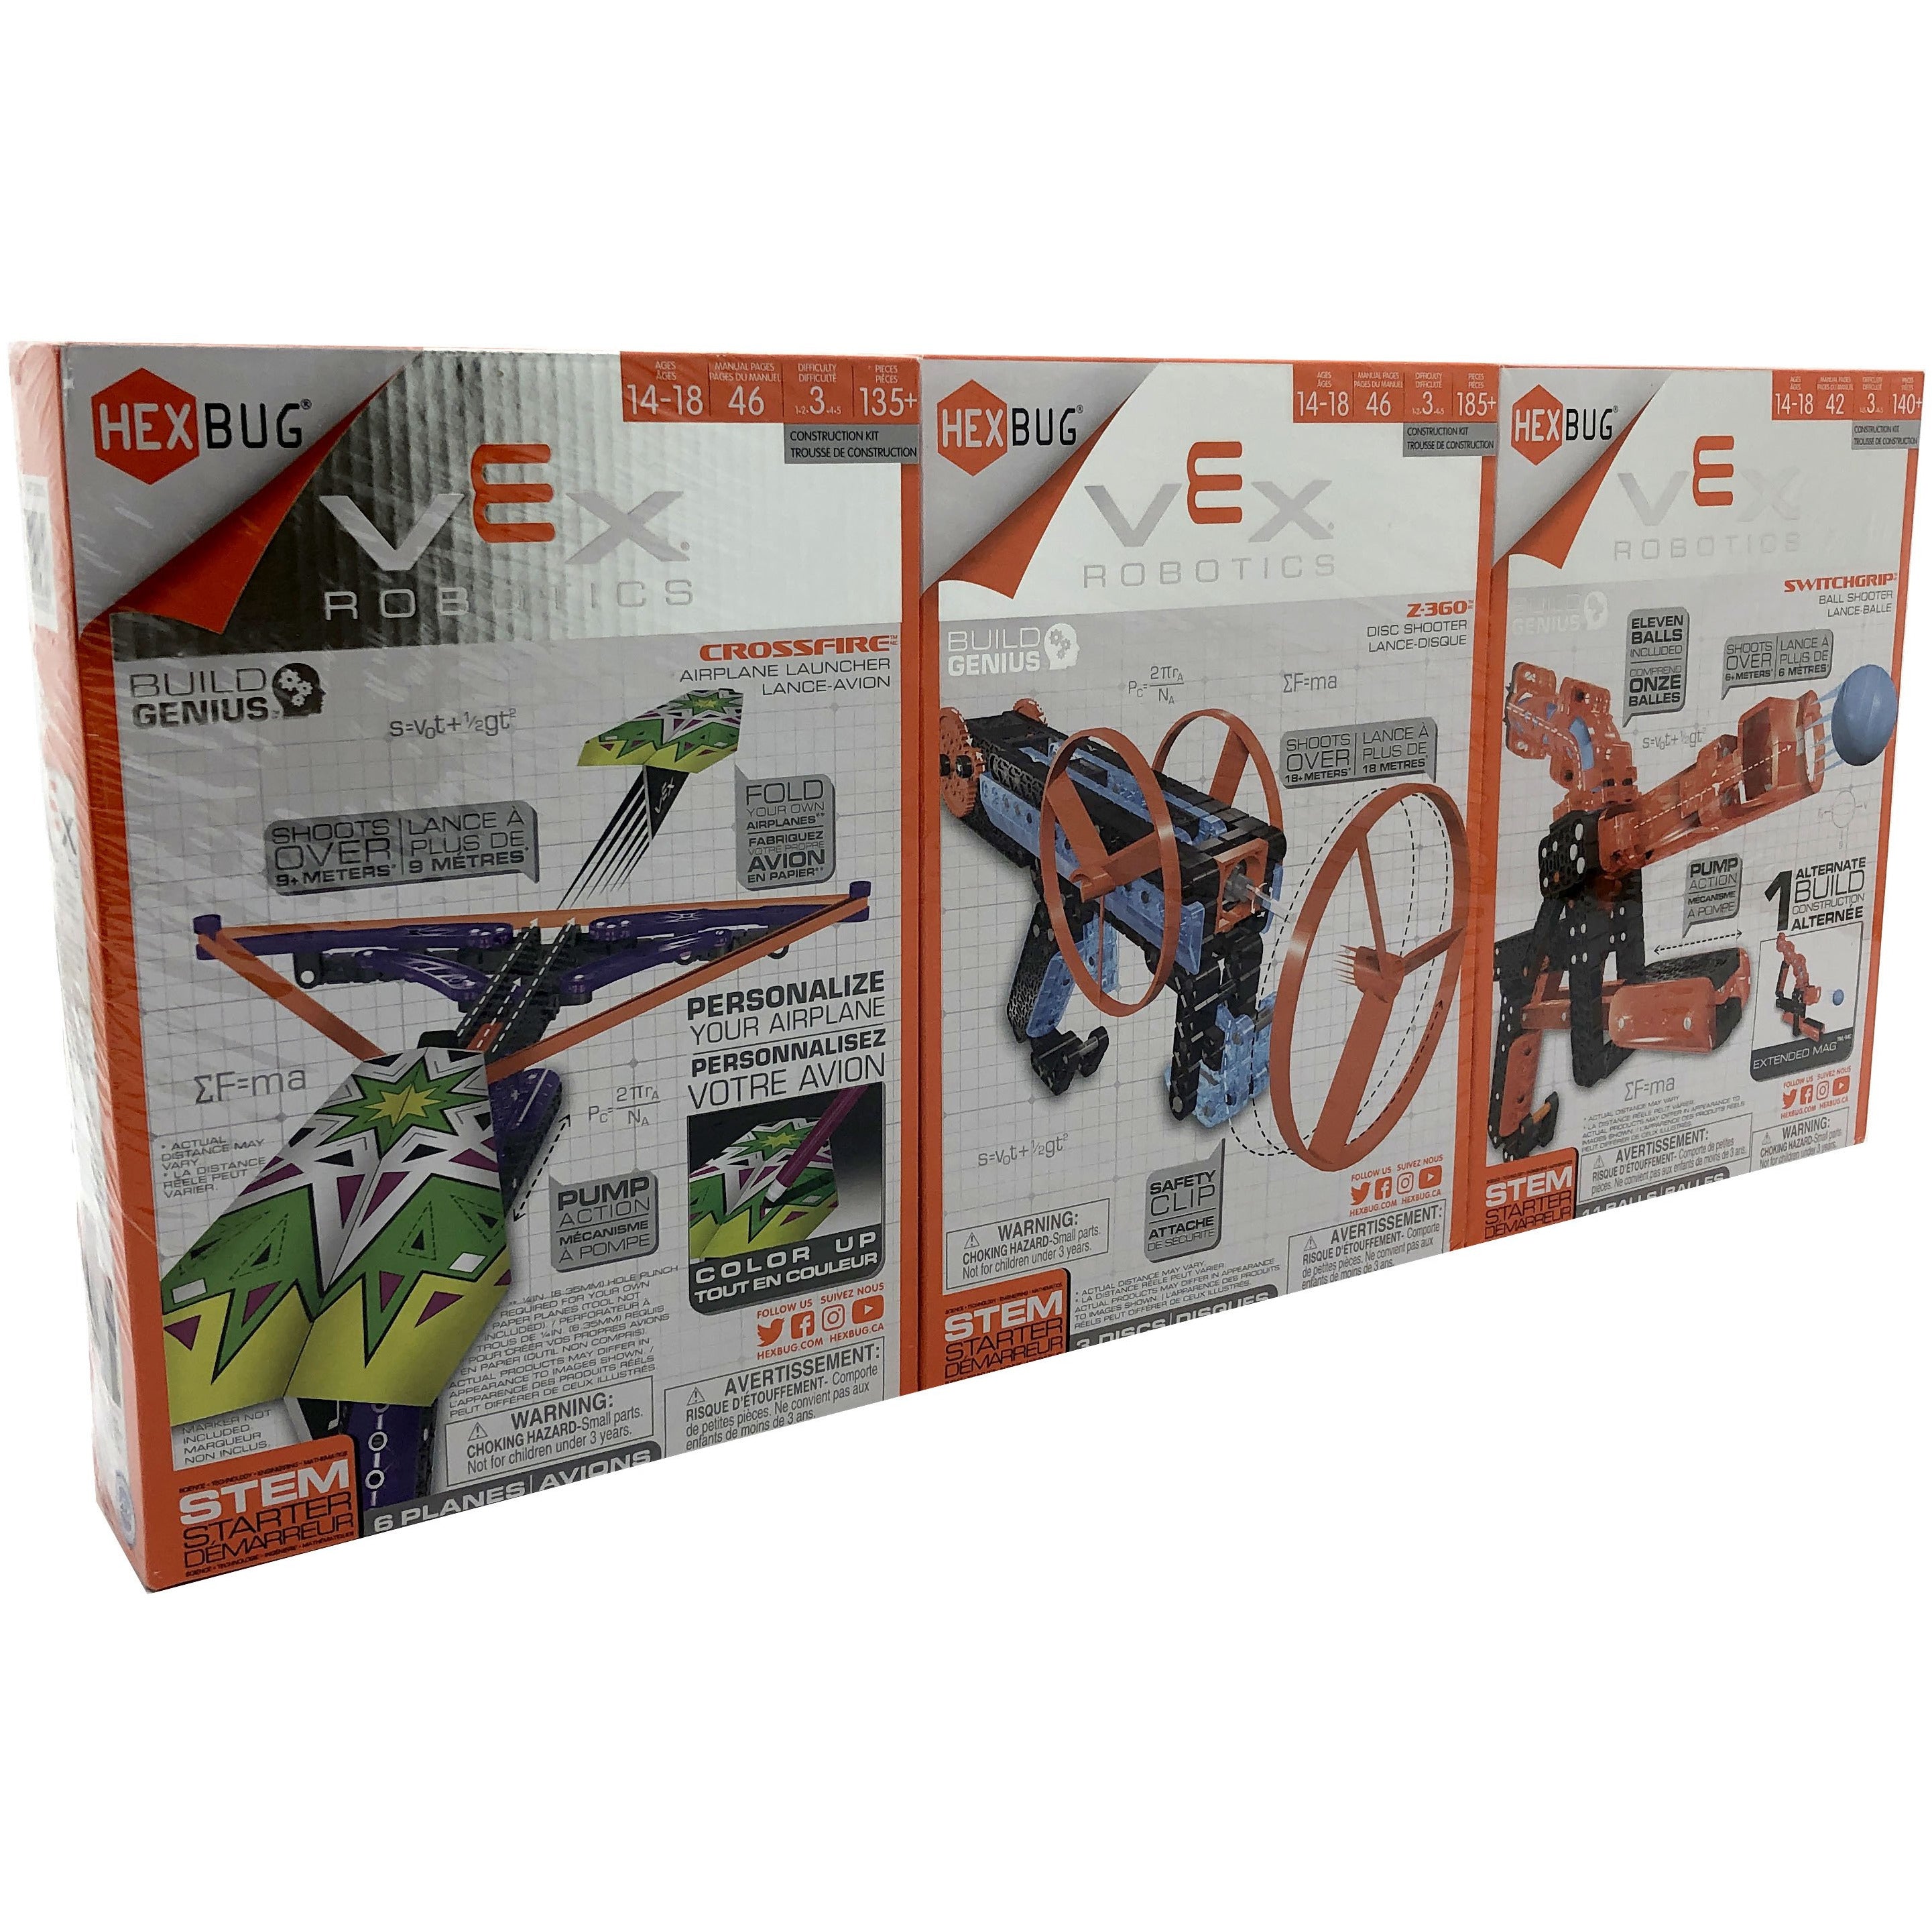 HexBug Vex Robotics 3 Pack / Steam Toy / Learning Toy / Ball Launcher / Airplane Launcher / Disc Shooter / Construction Toy / Difficulty 3 / Ages 14-18 **DEALS**